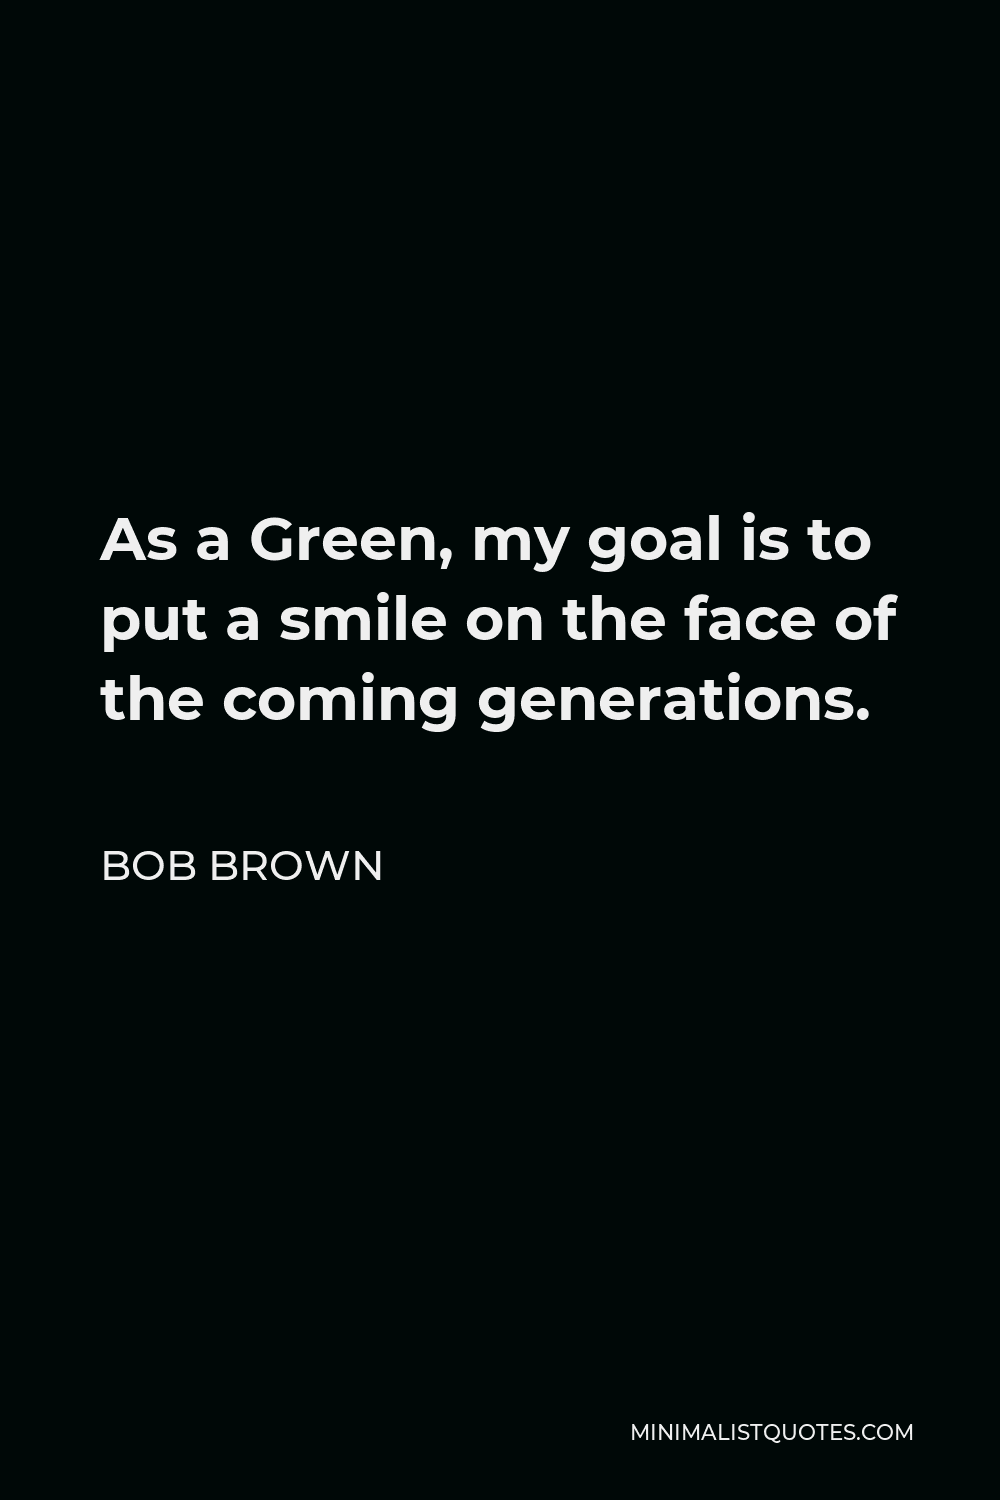 Bob Brown Quote - As a Green, my goal is to put a smile on the face of the coming generations.